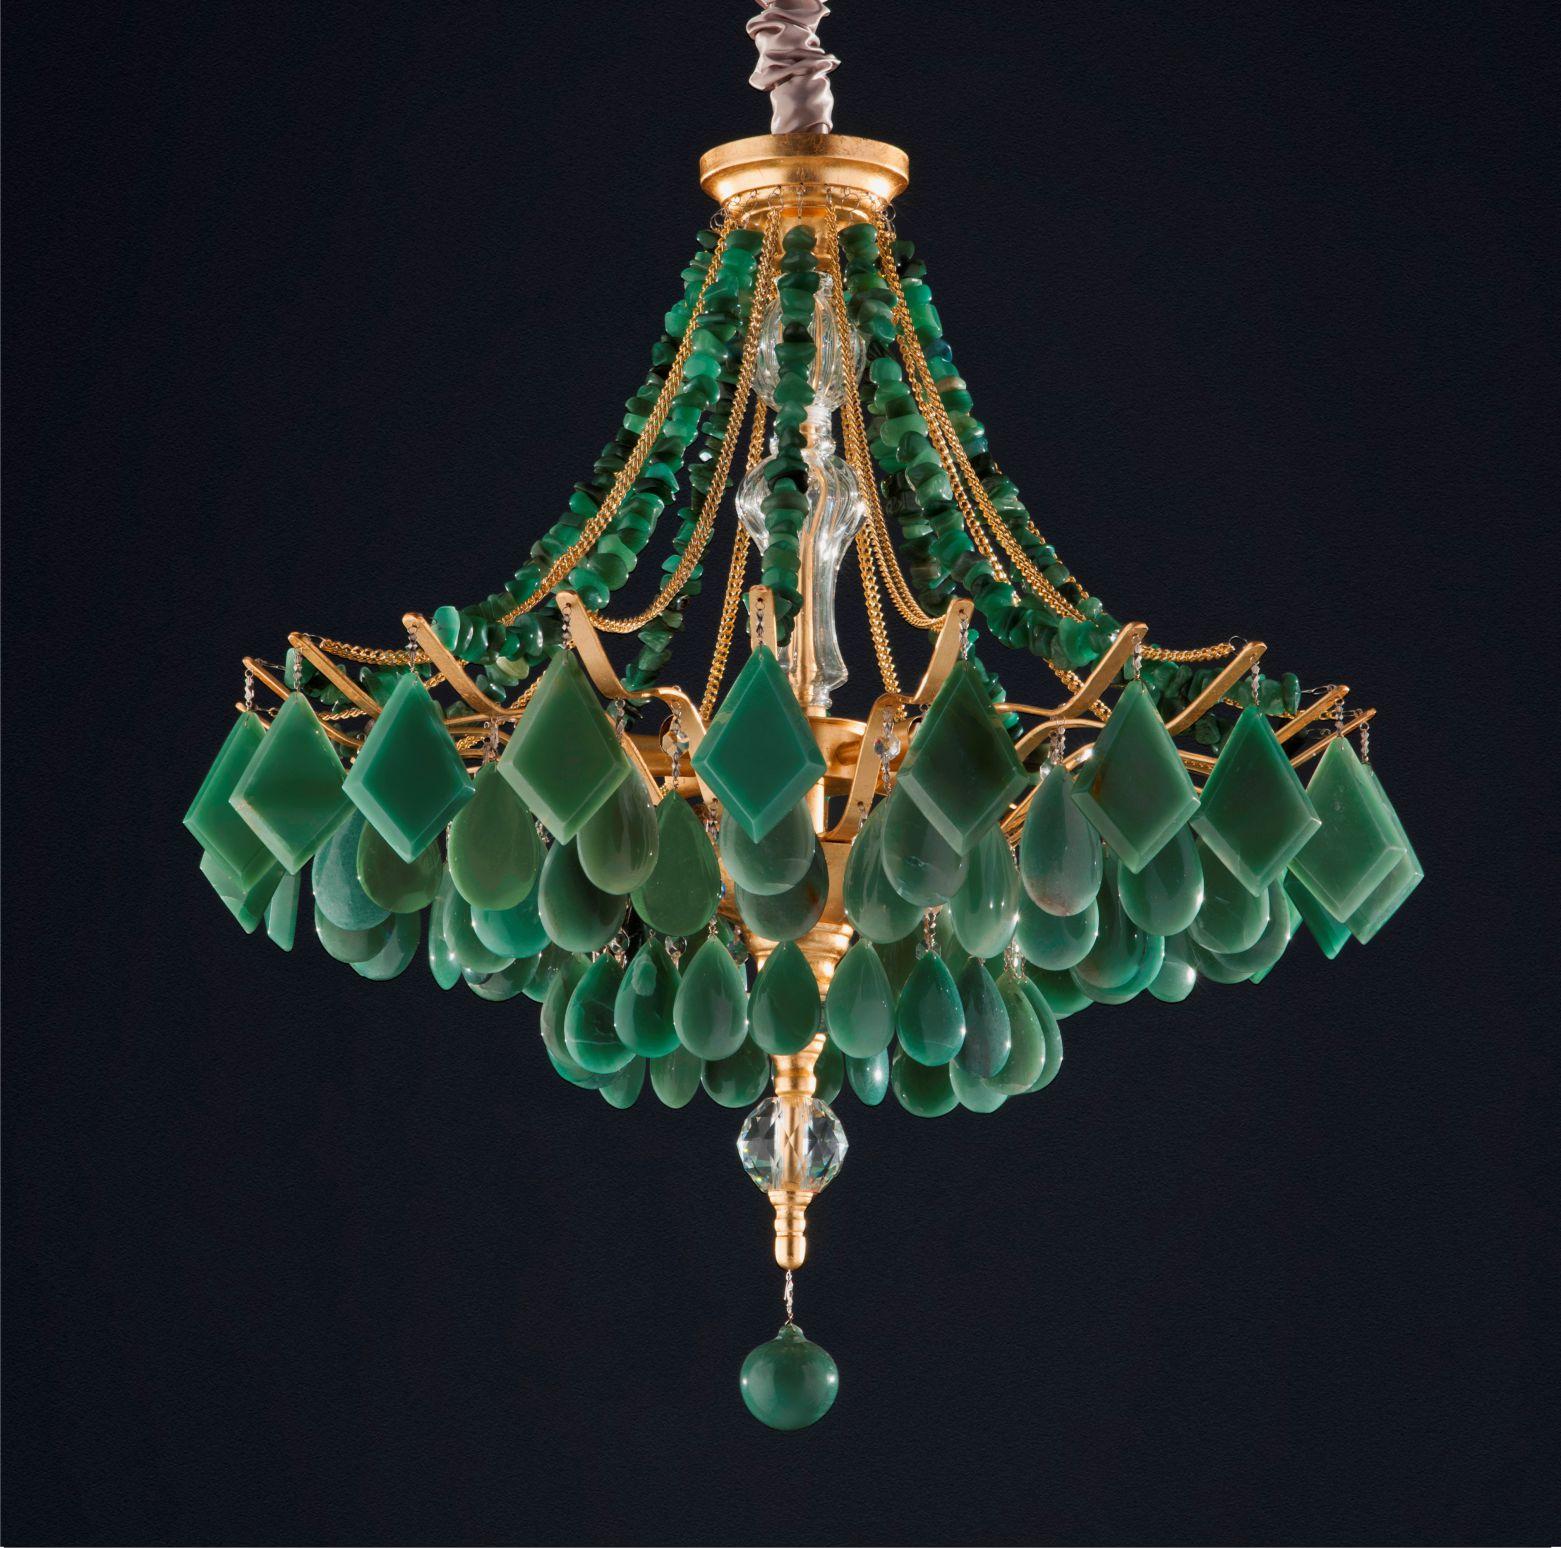 Green Quartz chandelier lamp by Aver
Dimensions: Diameter 68 x Height 75 cm 
Materials: Aluminum with gold leaf. Natural Quartz Crystals. 
Lighting: 06 x E14
Available in finishes: Silver veneer, aged silver veneer, gold veneer, aged gold veneer,